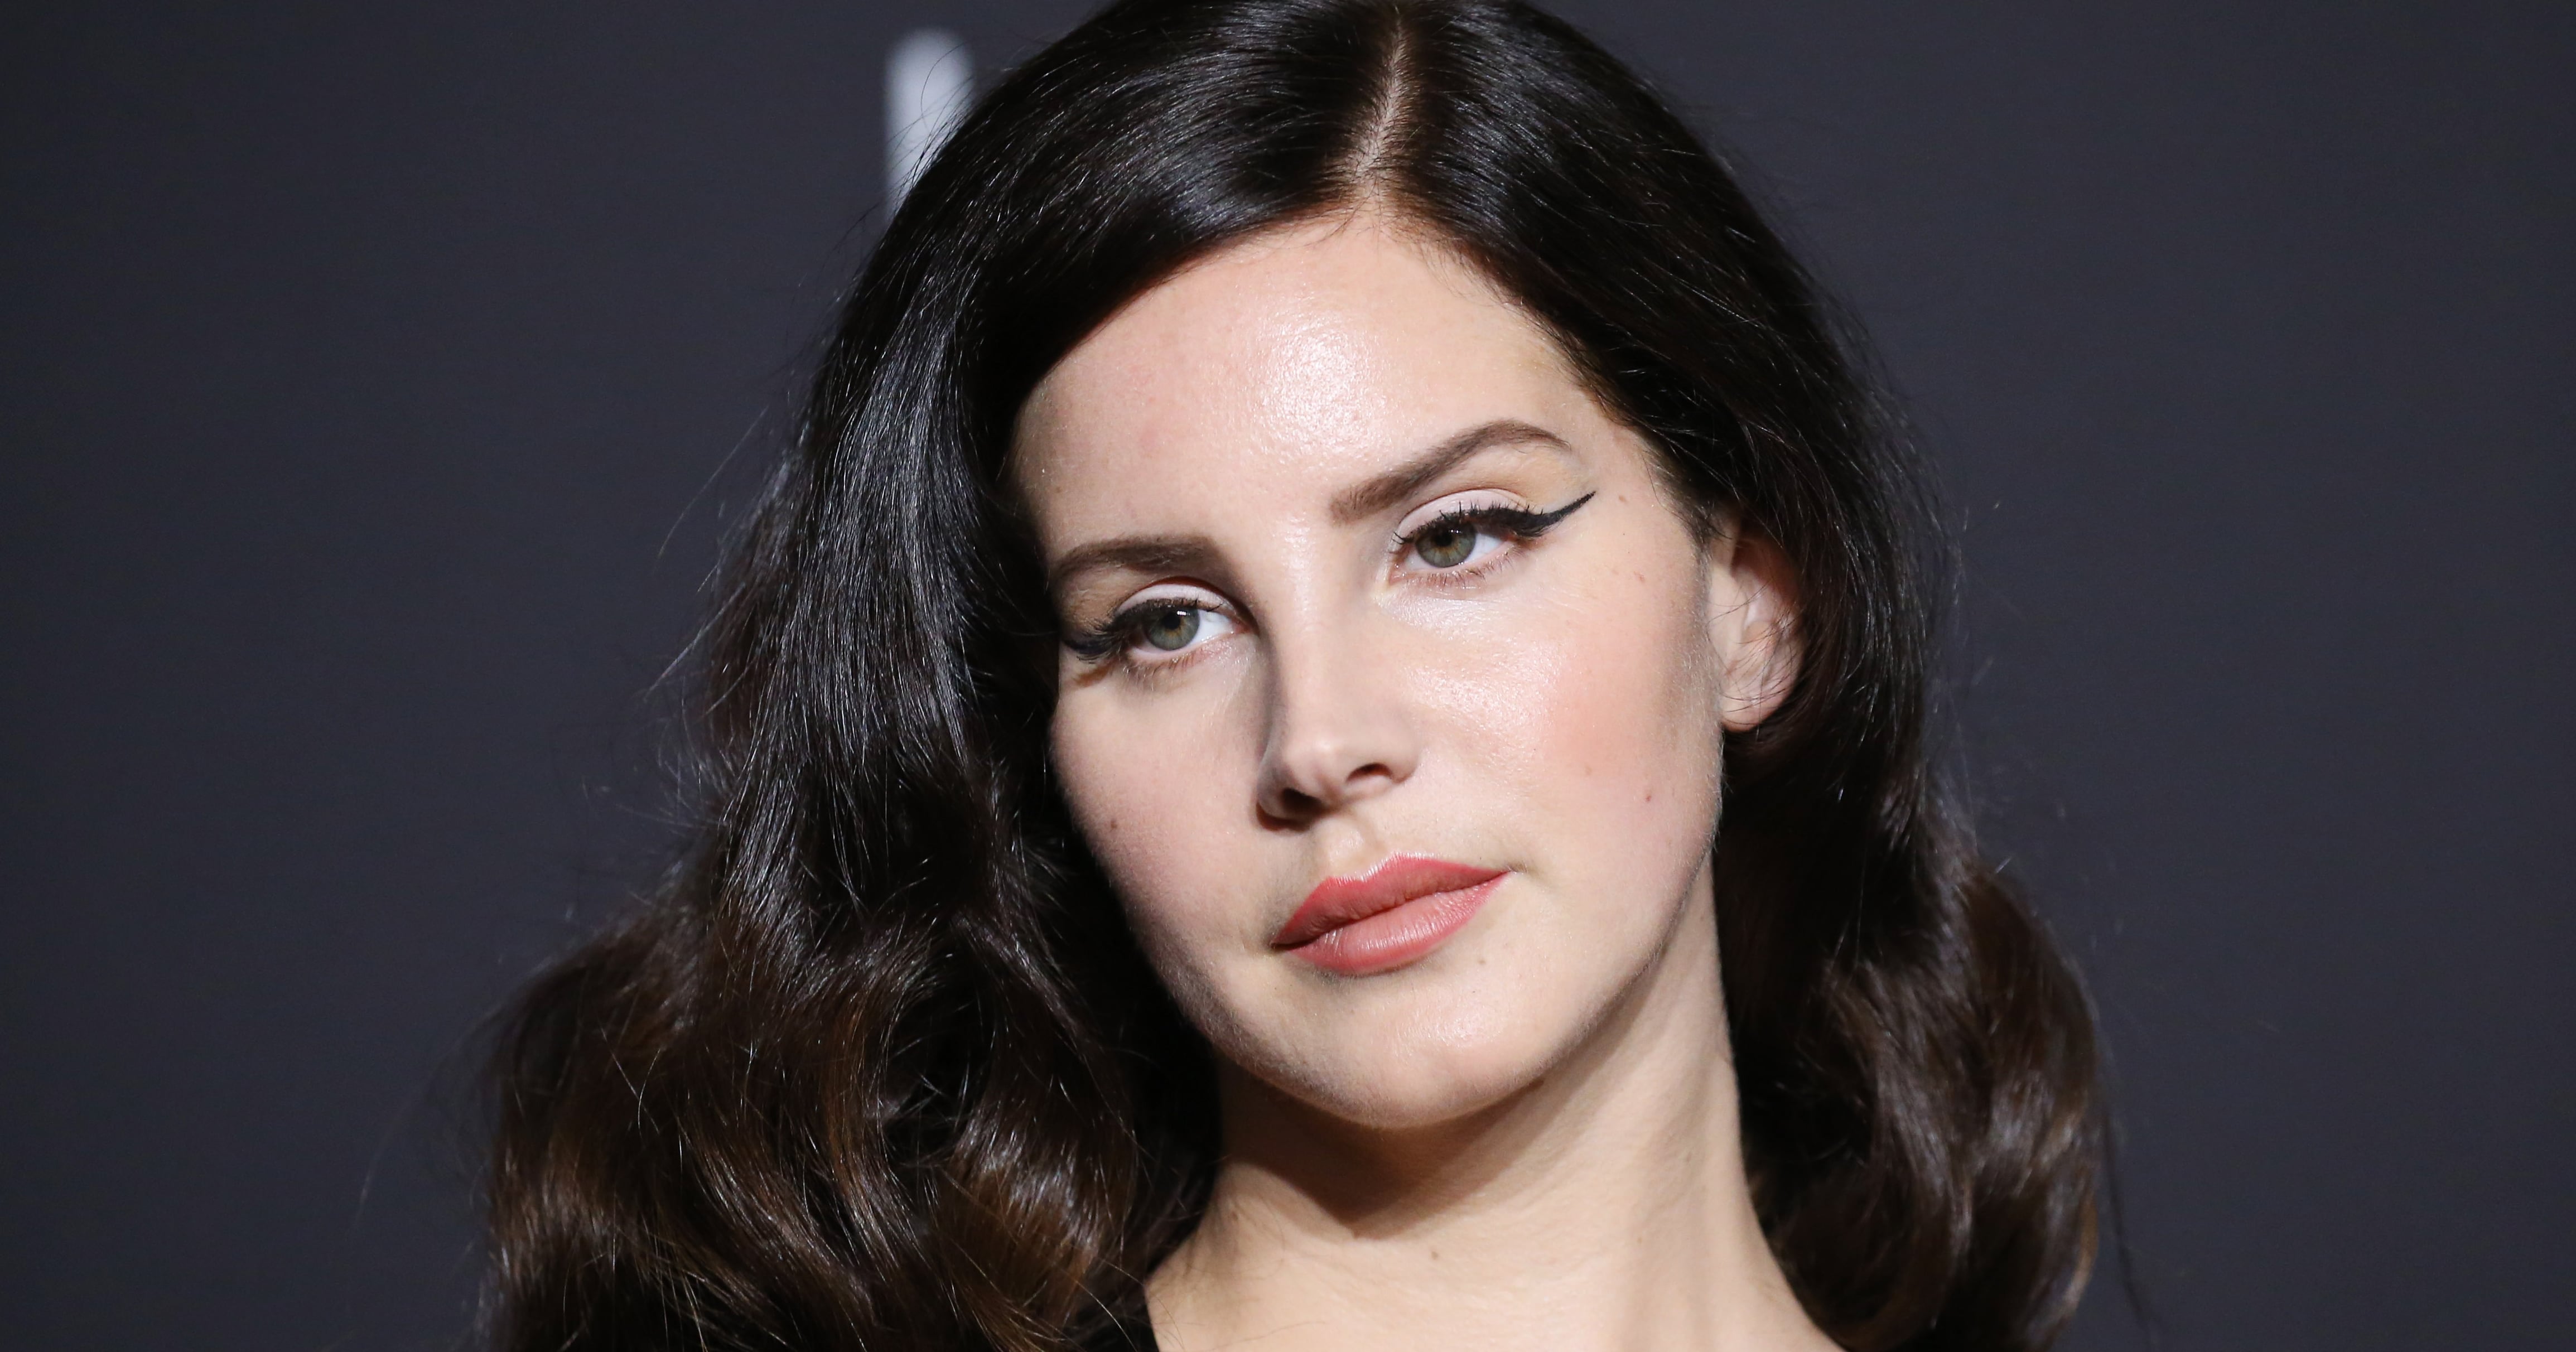 Lana Del Rey Speaks Out on Album Diversity Controversy